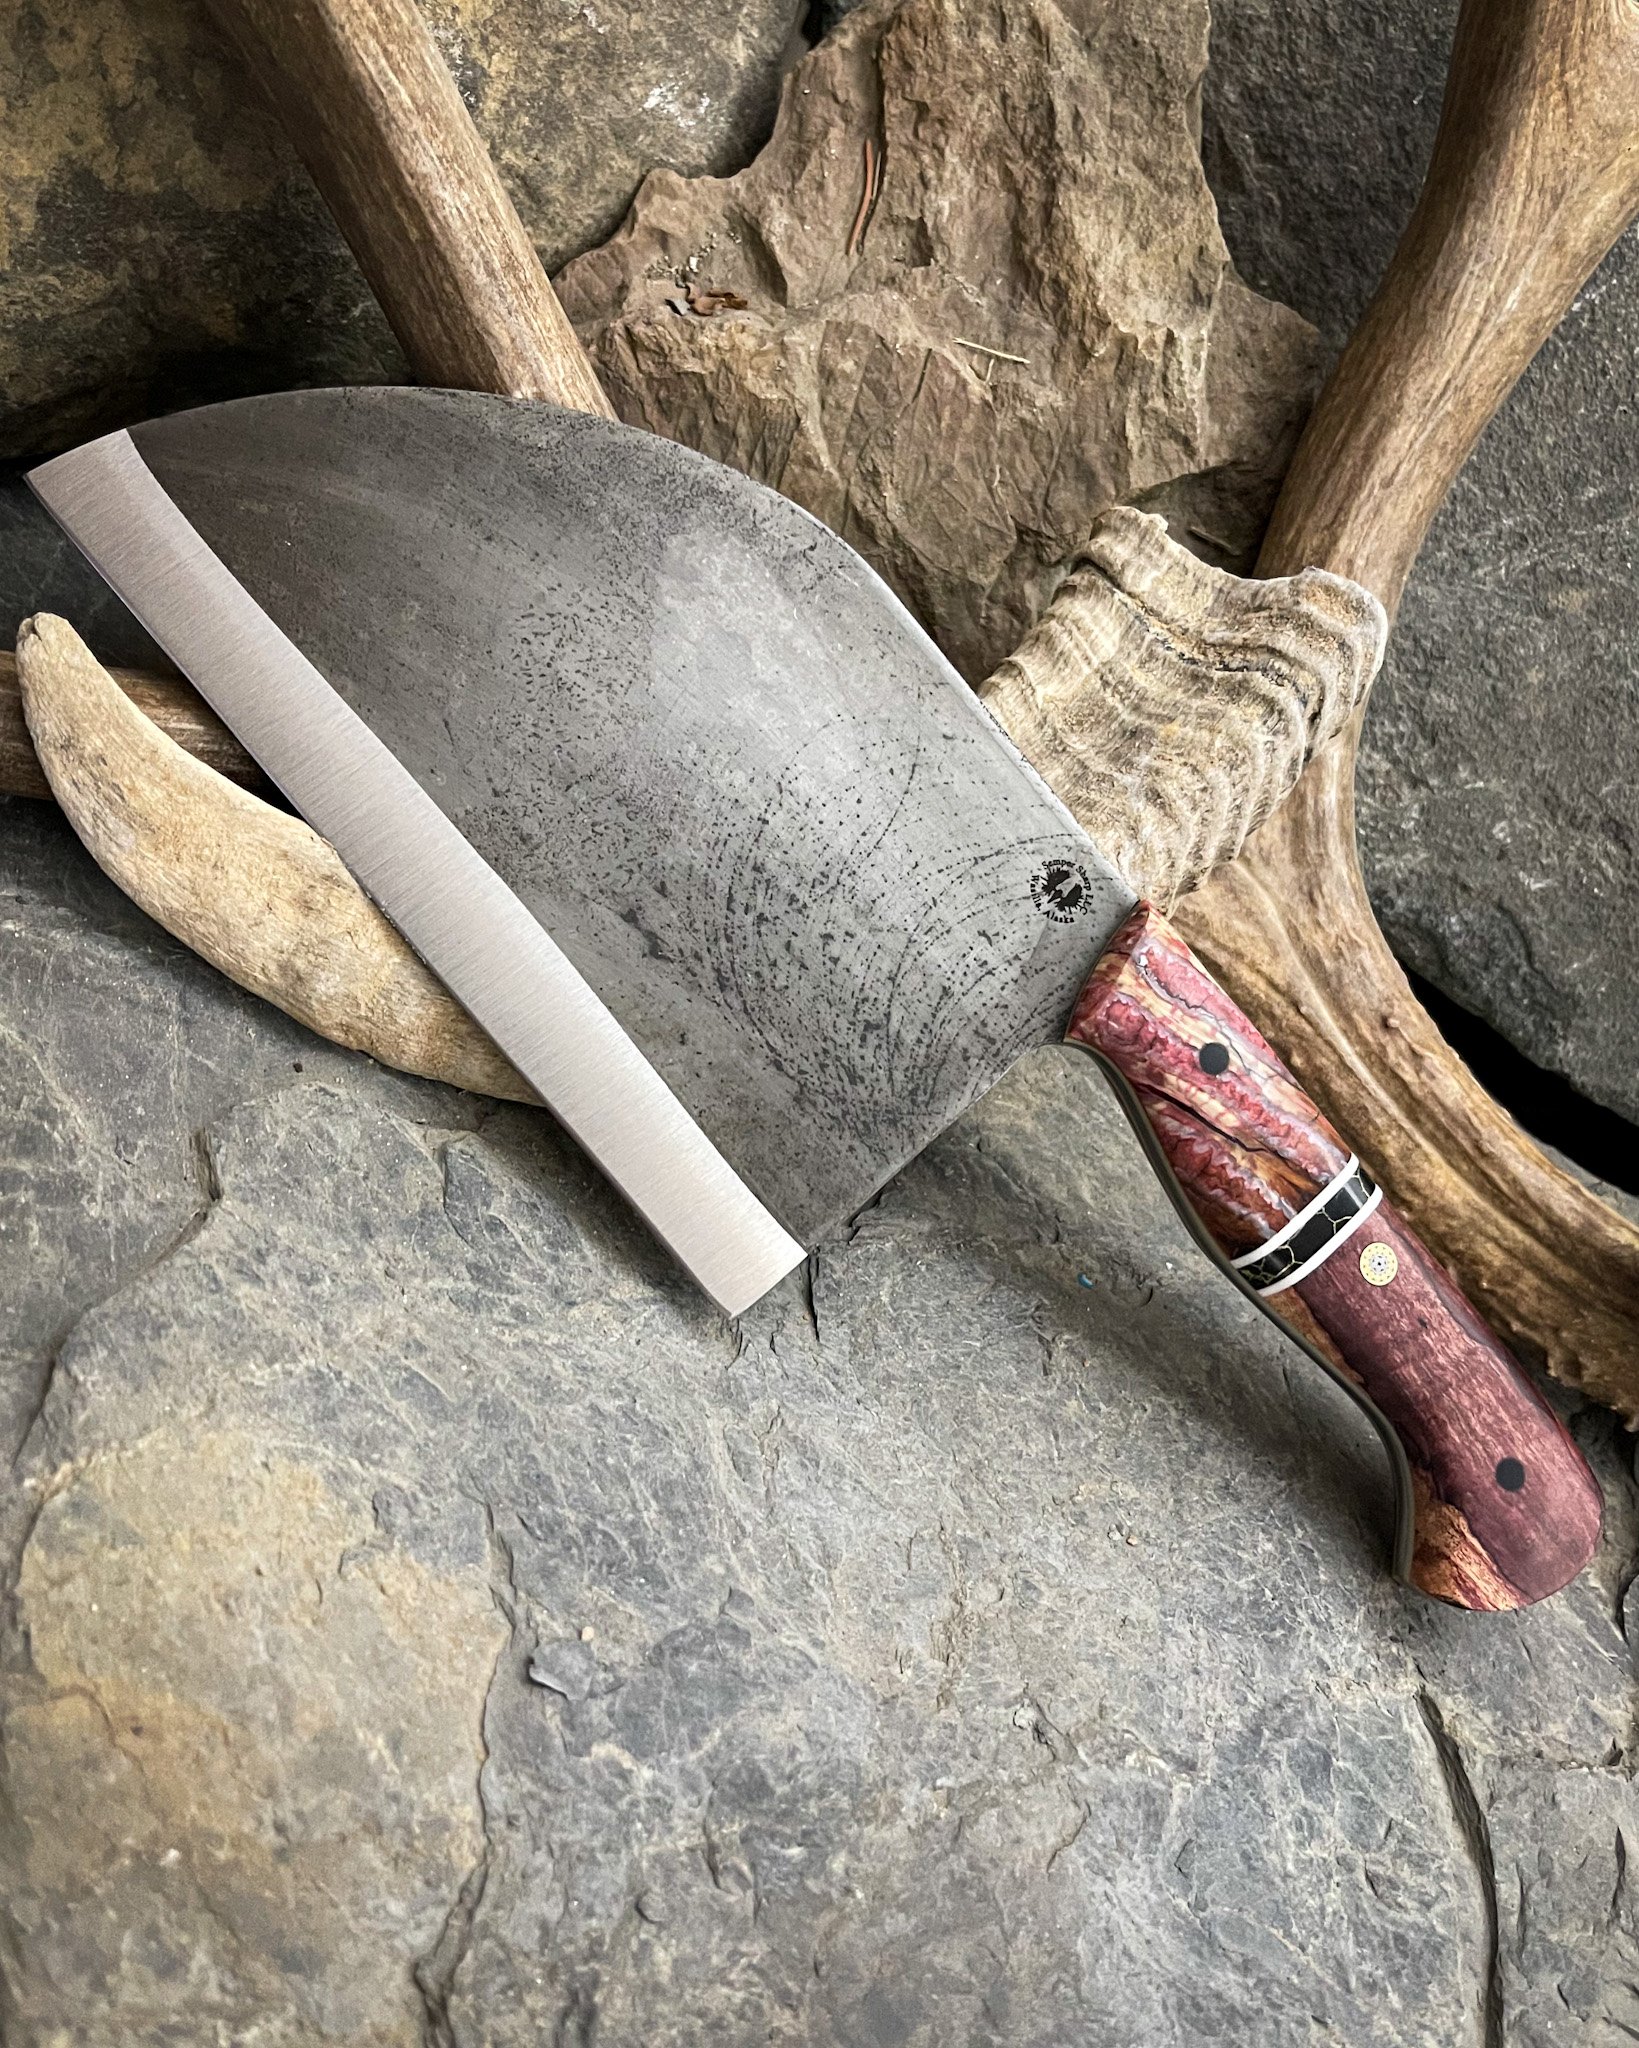 Handmade - Serbian Chef Cleaver Knife - Hand Forged Knife - Sunset Yel